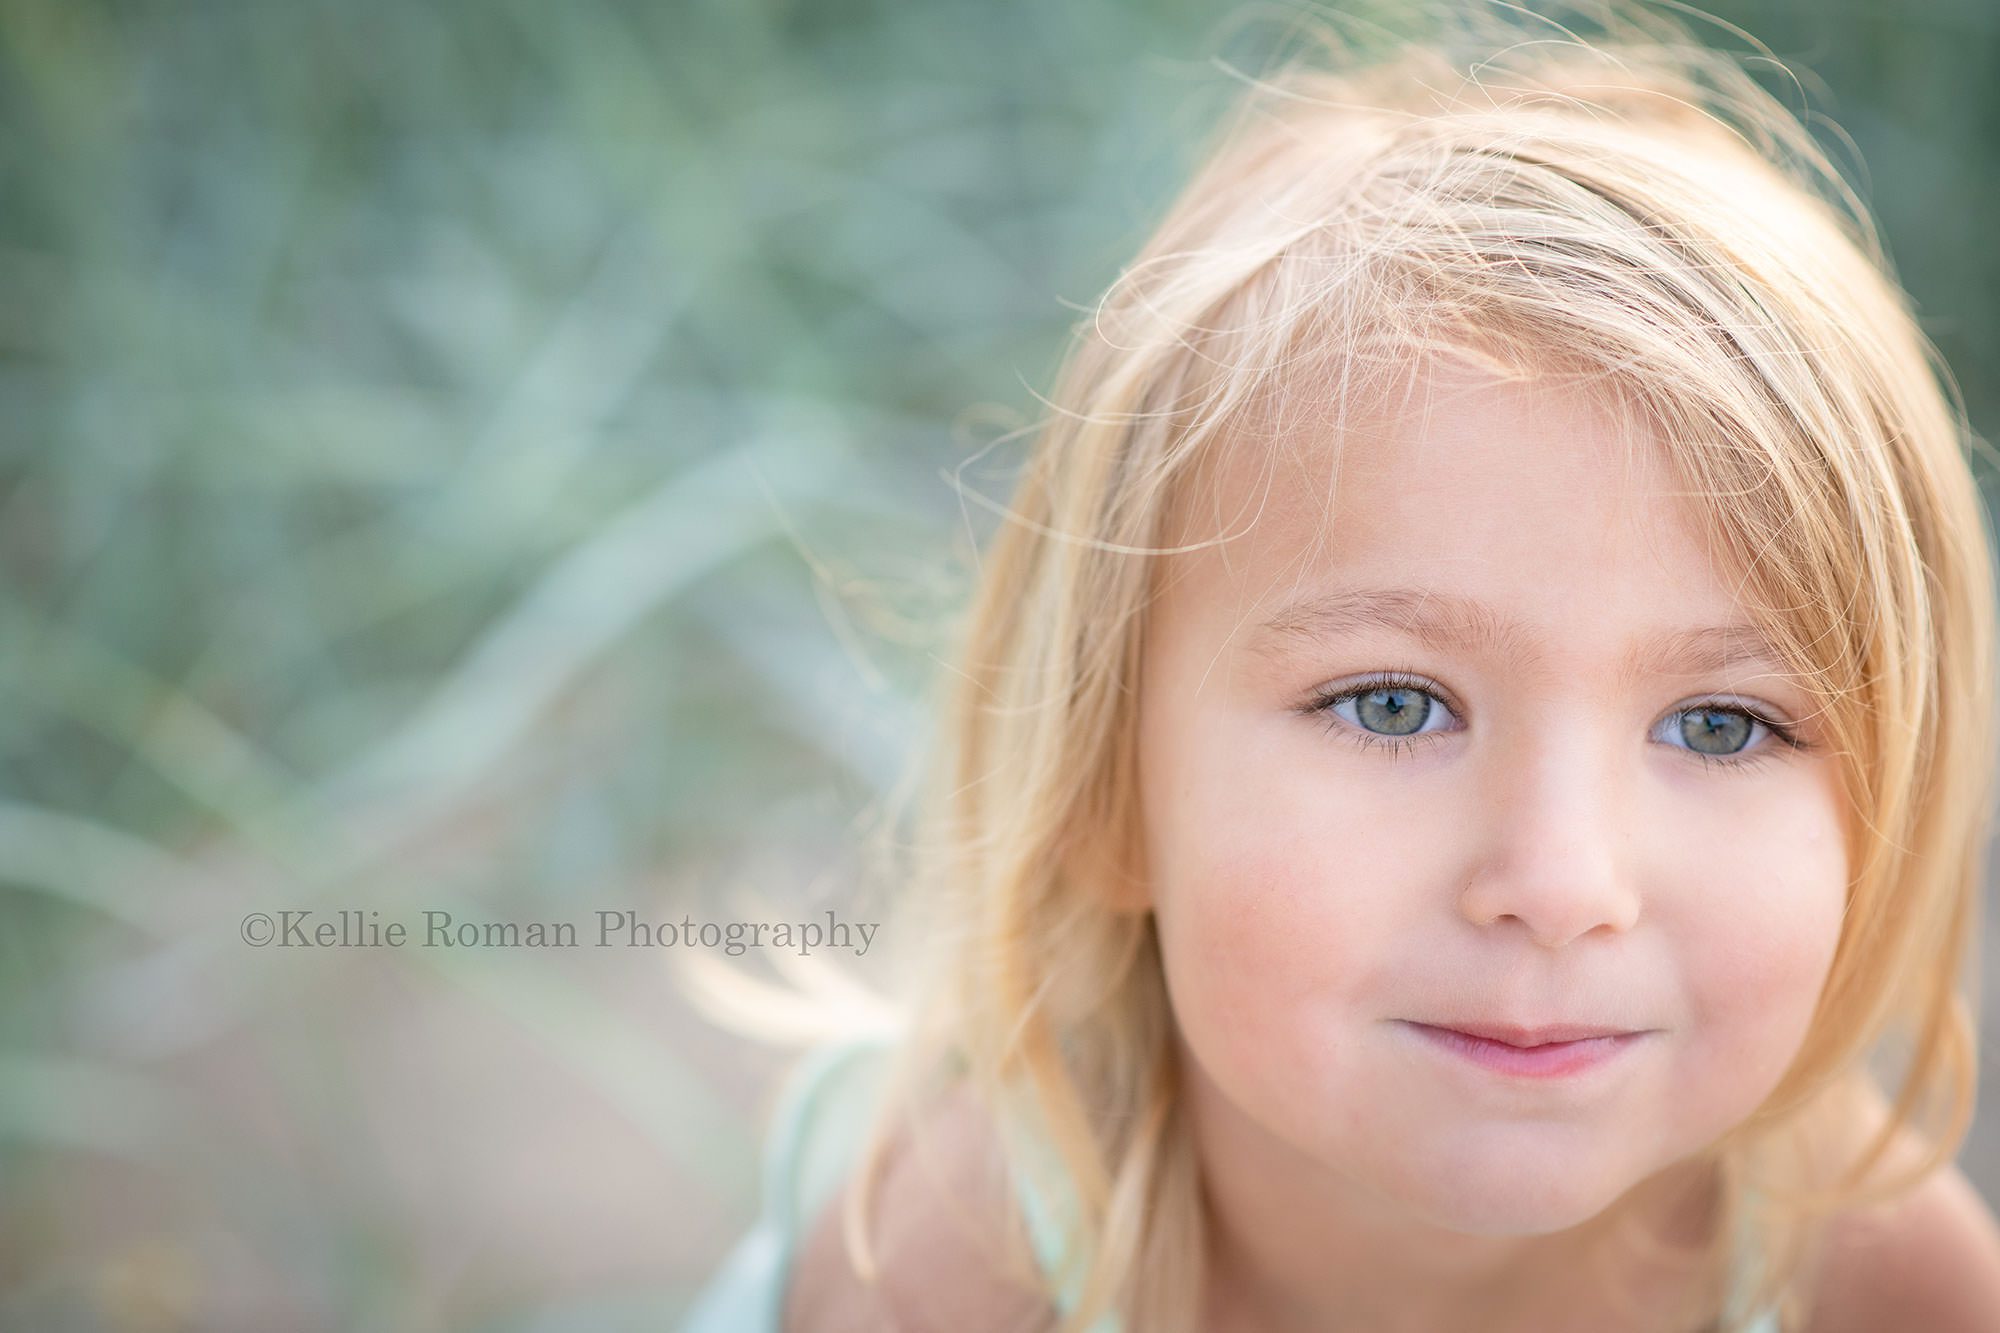 beach colors a close up photo of a three year old girl with blonde hair and green eyes she is looking off to the side and smiling with tall beach grass behind her